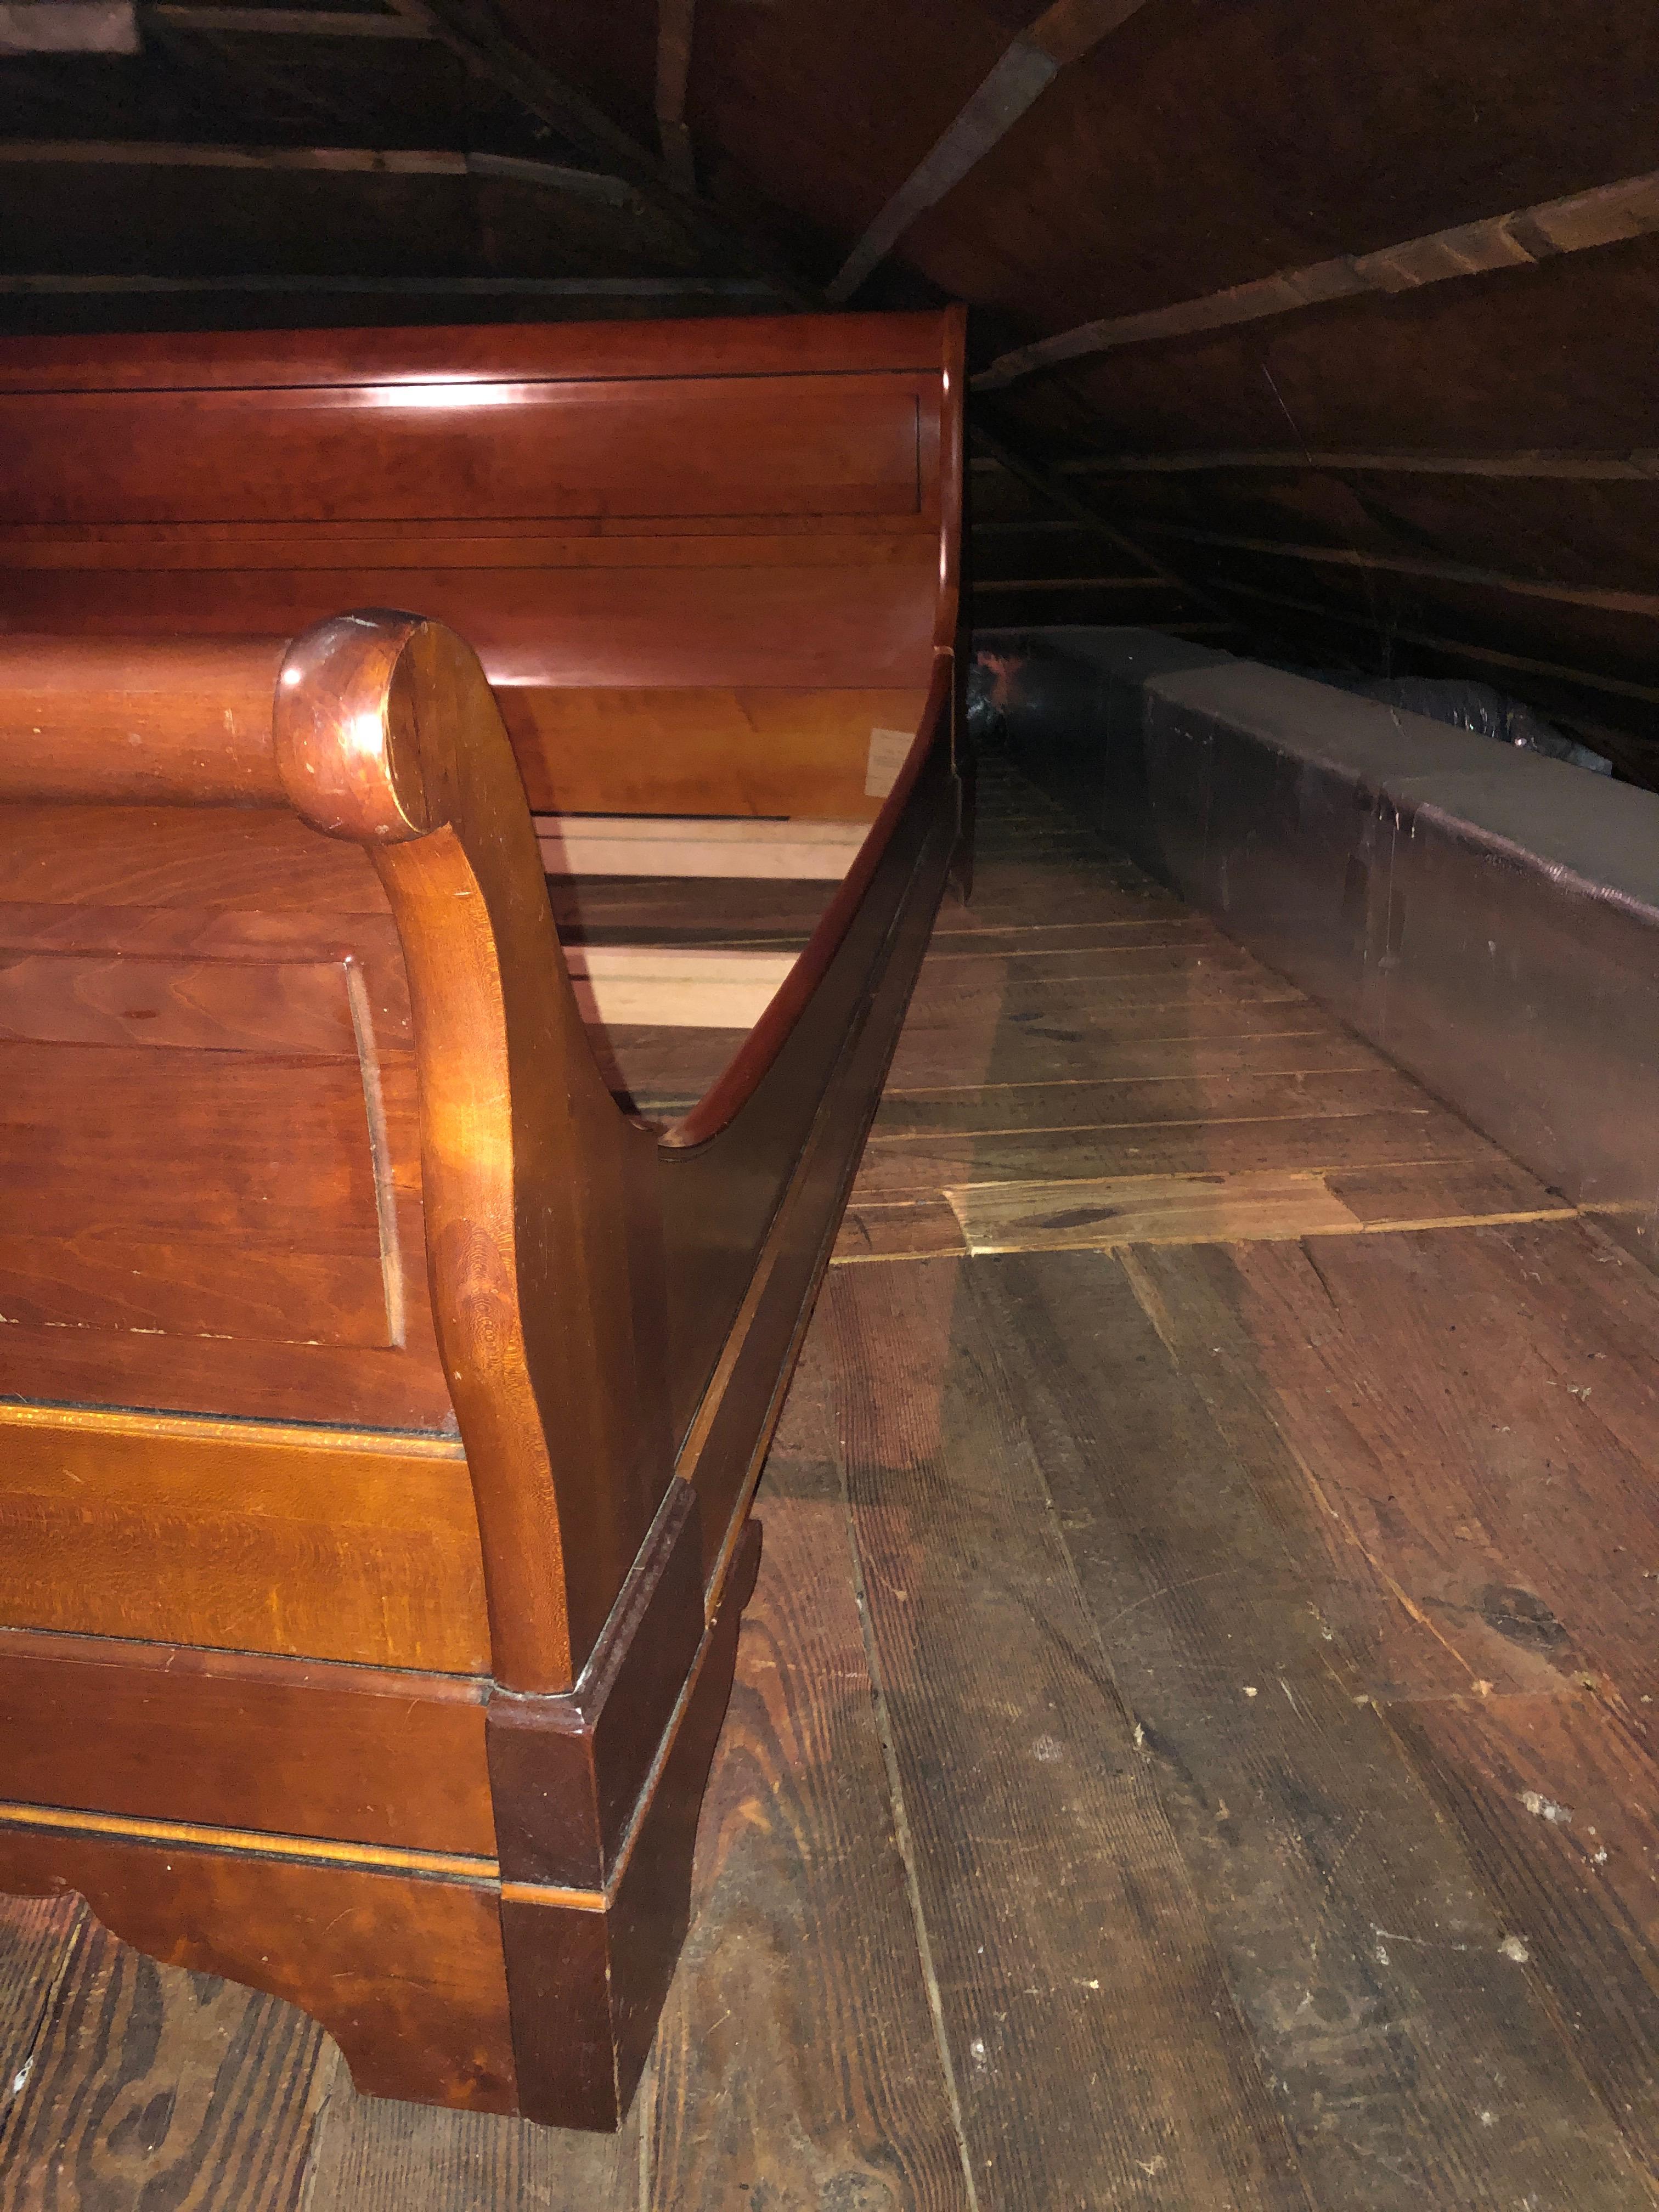 A handsome cherry Classic sleigh bed, low to the ground and sturdy, meant for a queen sized mattress and no box spring.
Measures: Headboard is 33